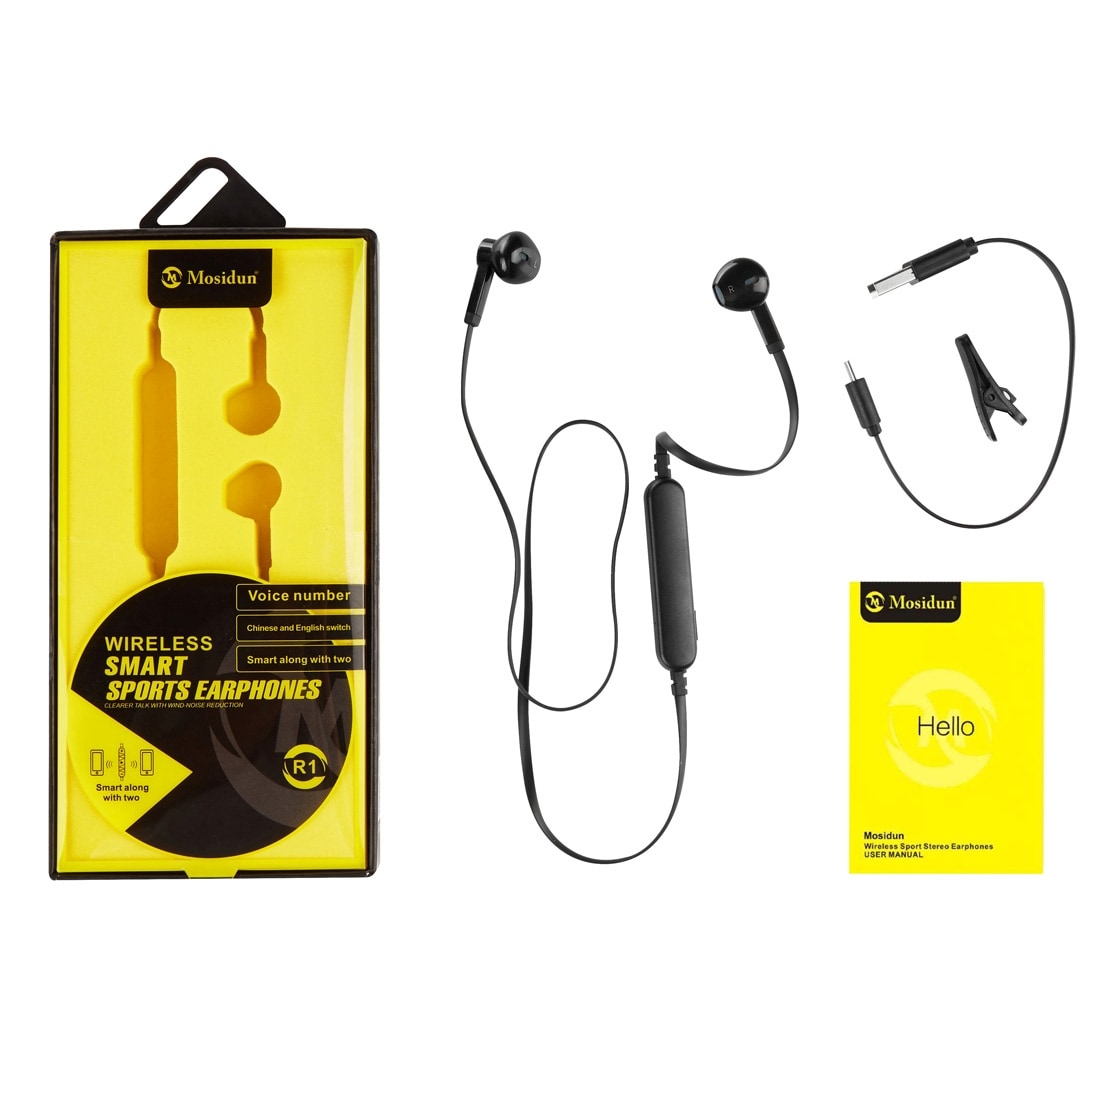 Bluetooth headset med kabel & fjernkontroll - iPhone / Samsung / Sony mm